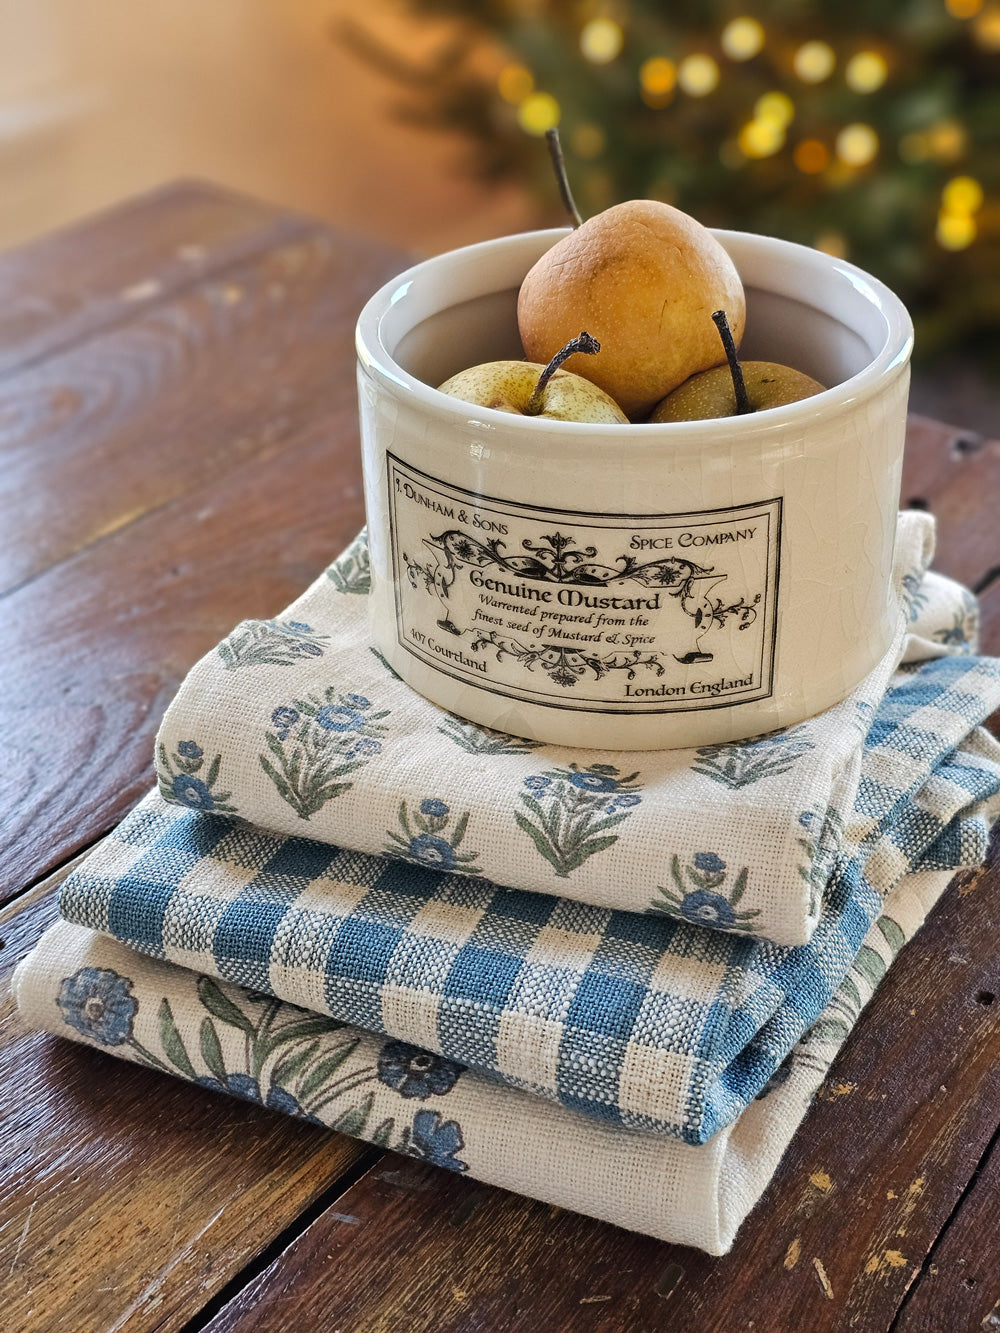 All Cotton and Linen Kitchen Towels, Dish Towels, Farmhouse Hand